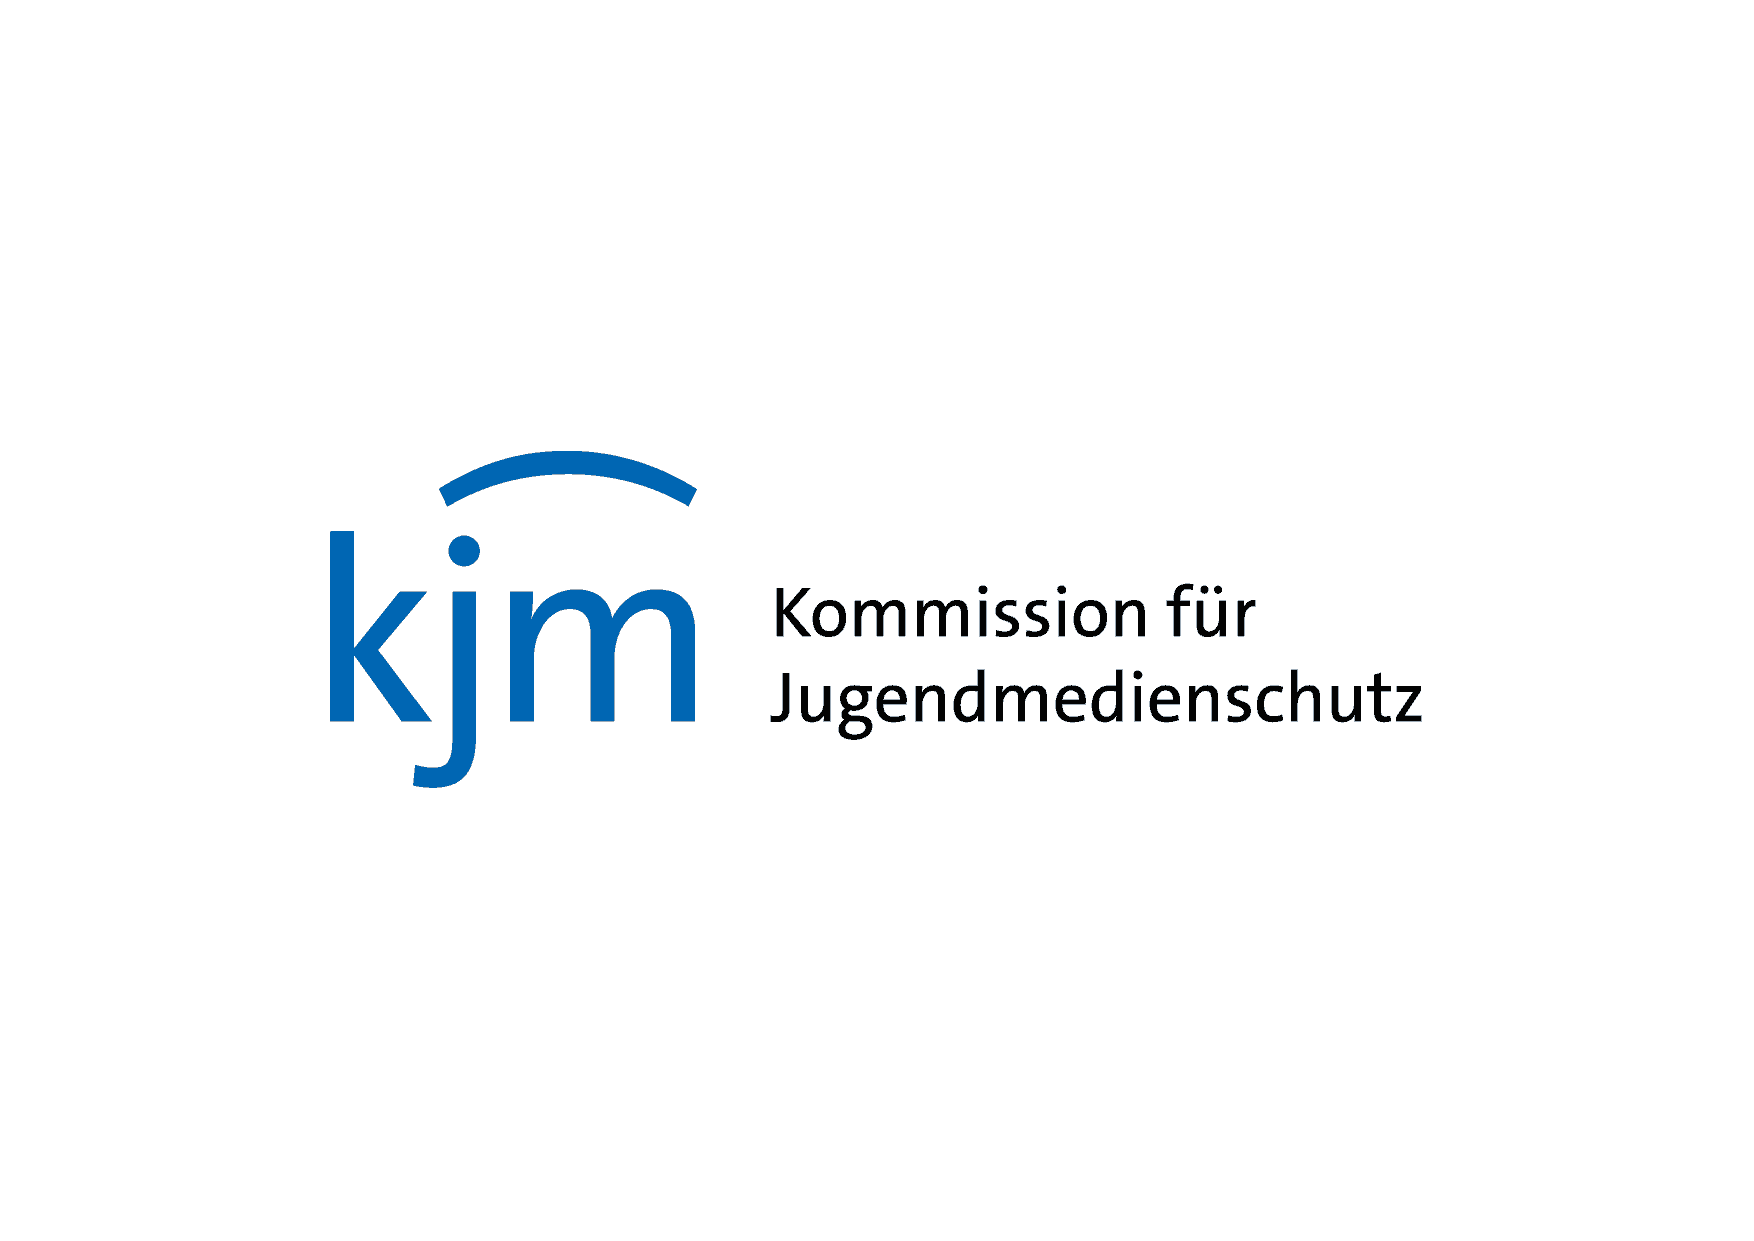 KJM and youth protection developments in the games industry